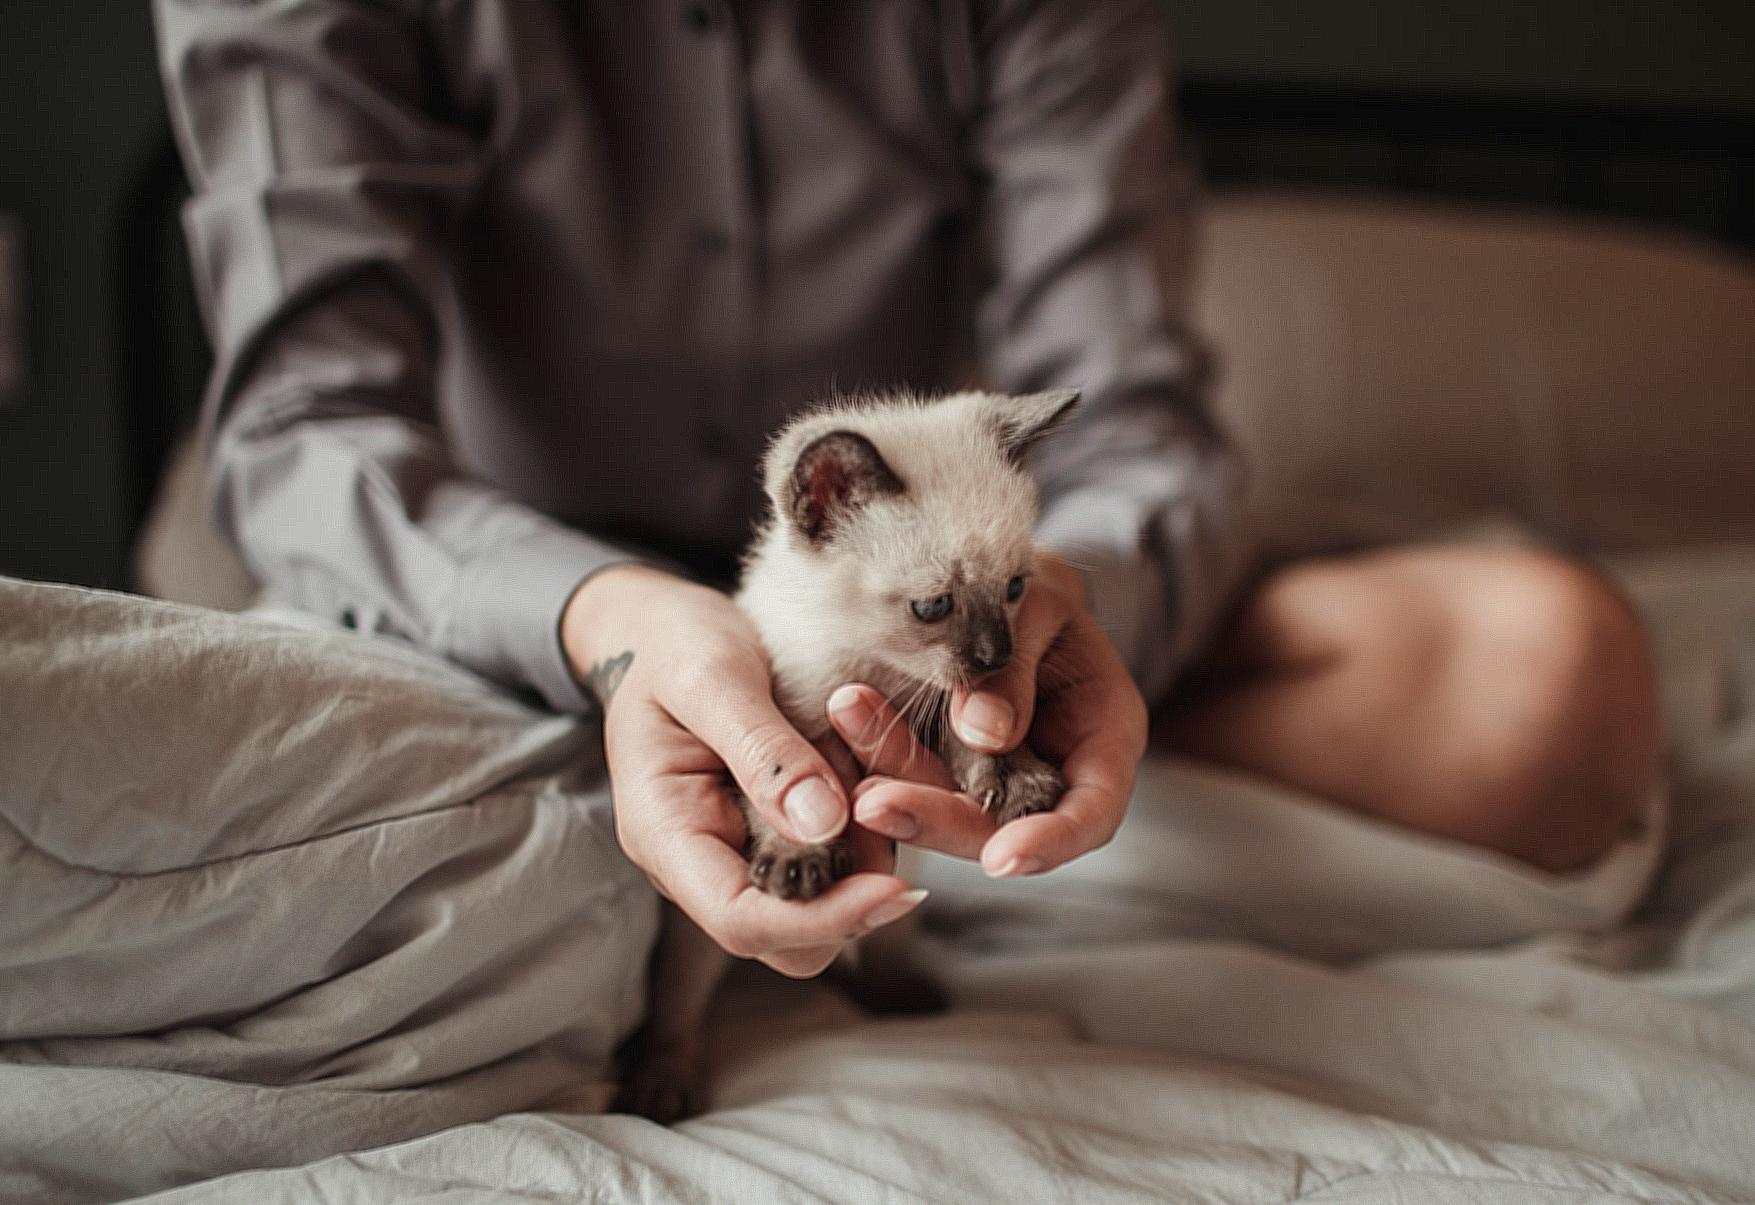 A Kitten on a Person's Hand